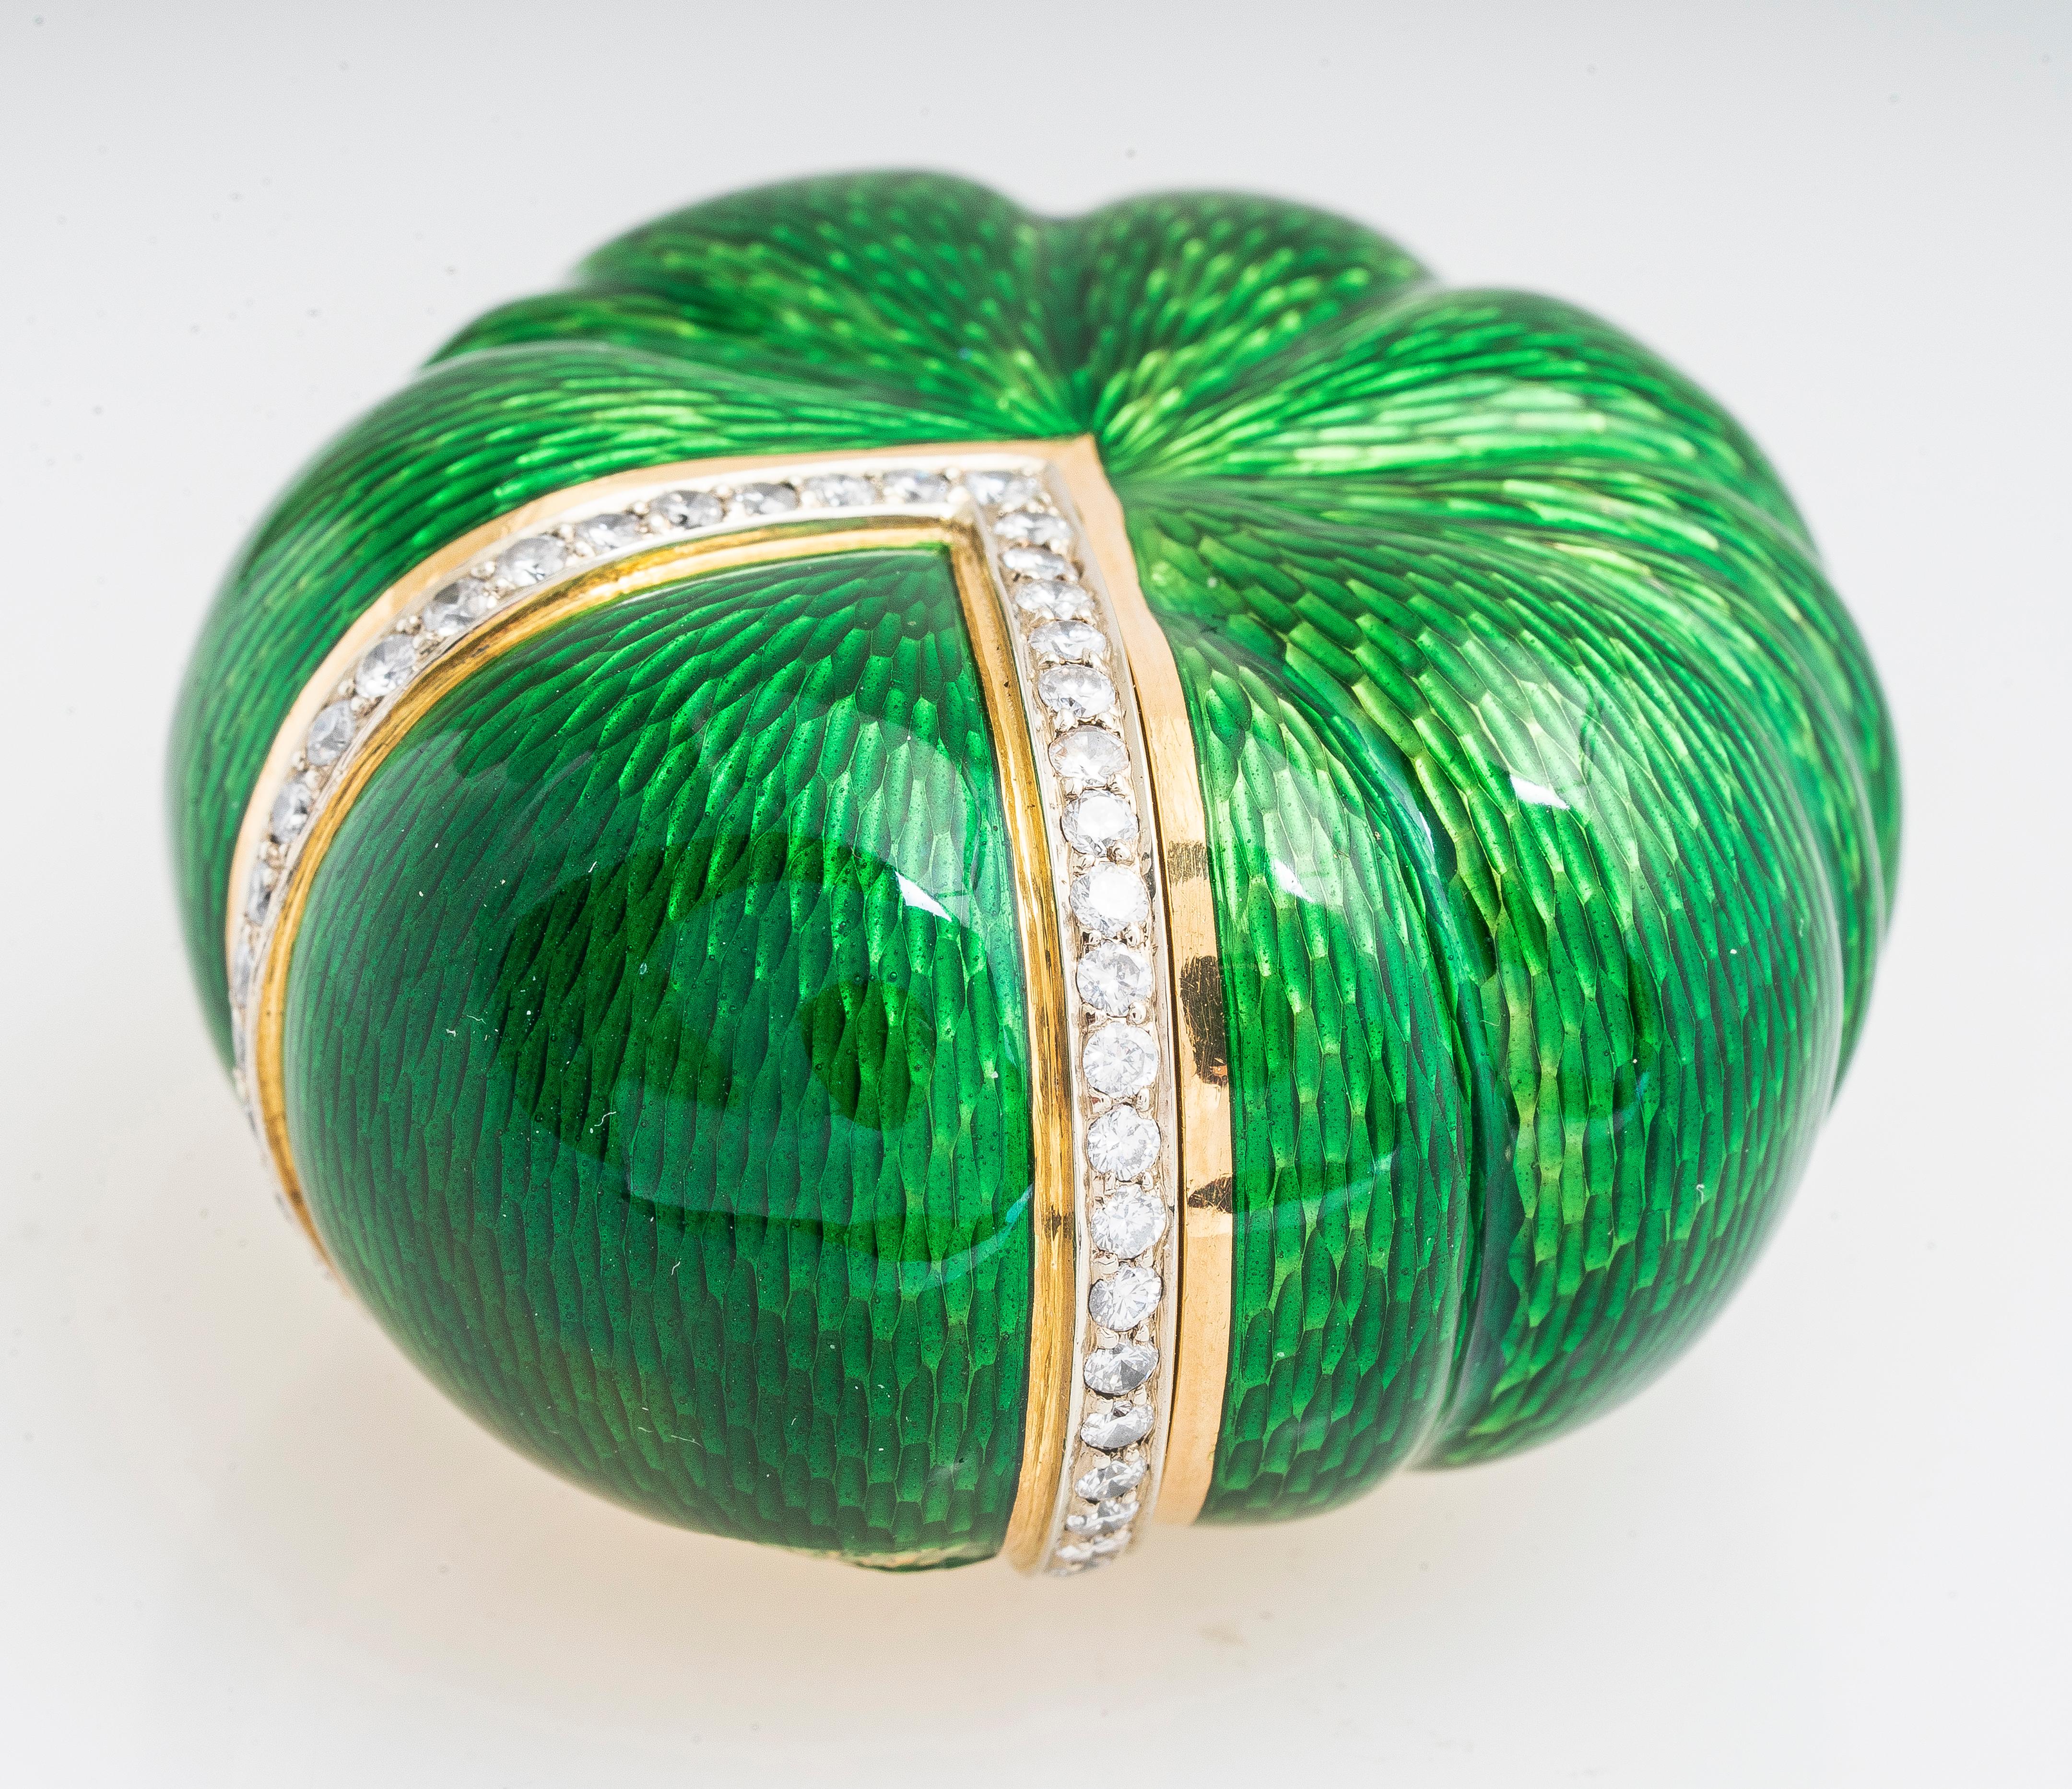 Vintage 18ky gold and diamond shell or pumpkin shaped pill/snuff box with green enameling.  Has 0.78 carat total weight of RBC diamonds H-I color and SI2-I1 clarity.  Besides the enamel that is worn off at the base of the V, the box is very well